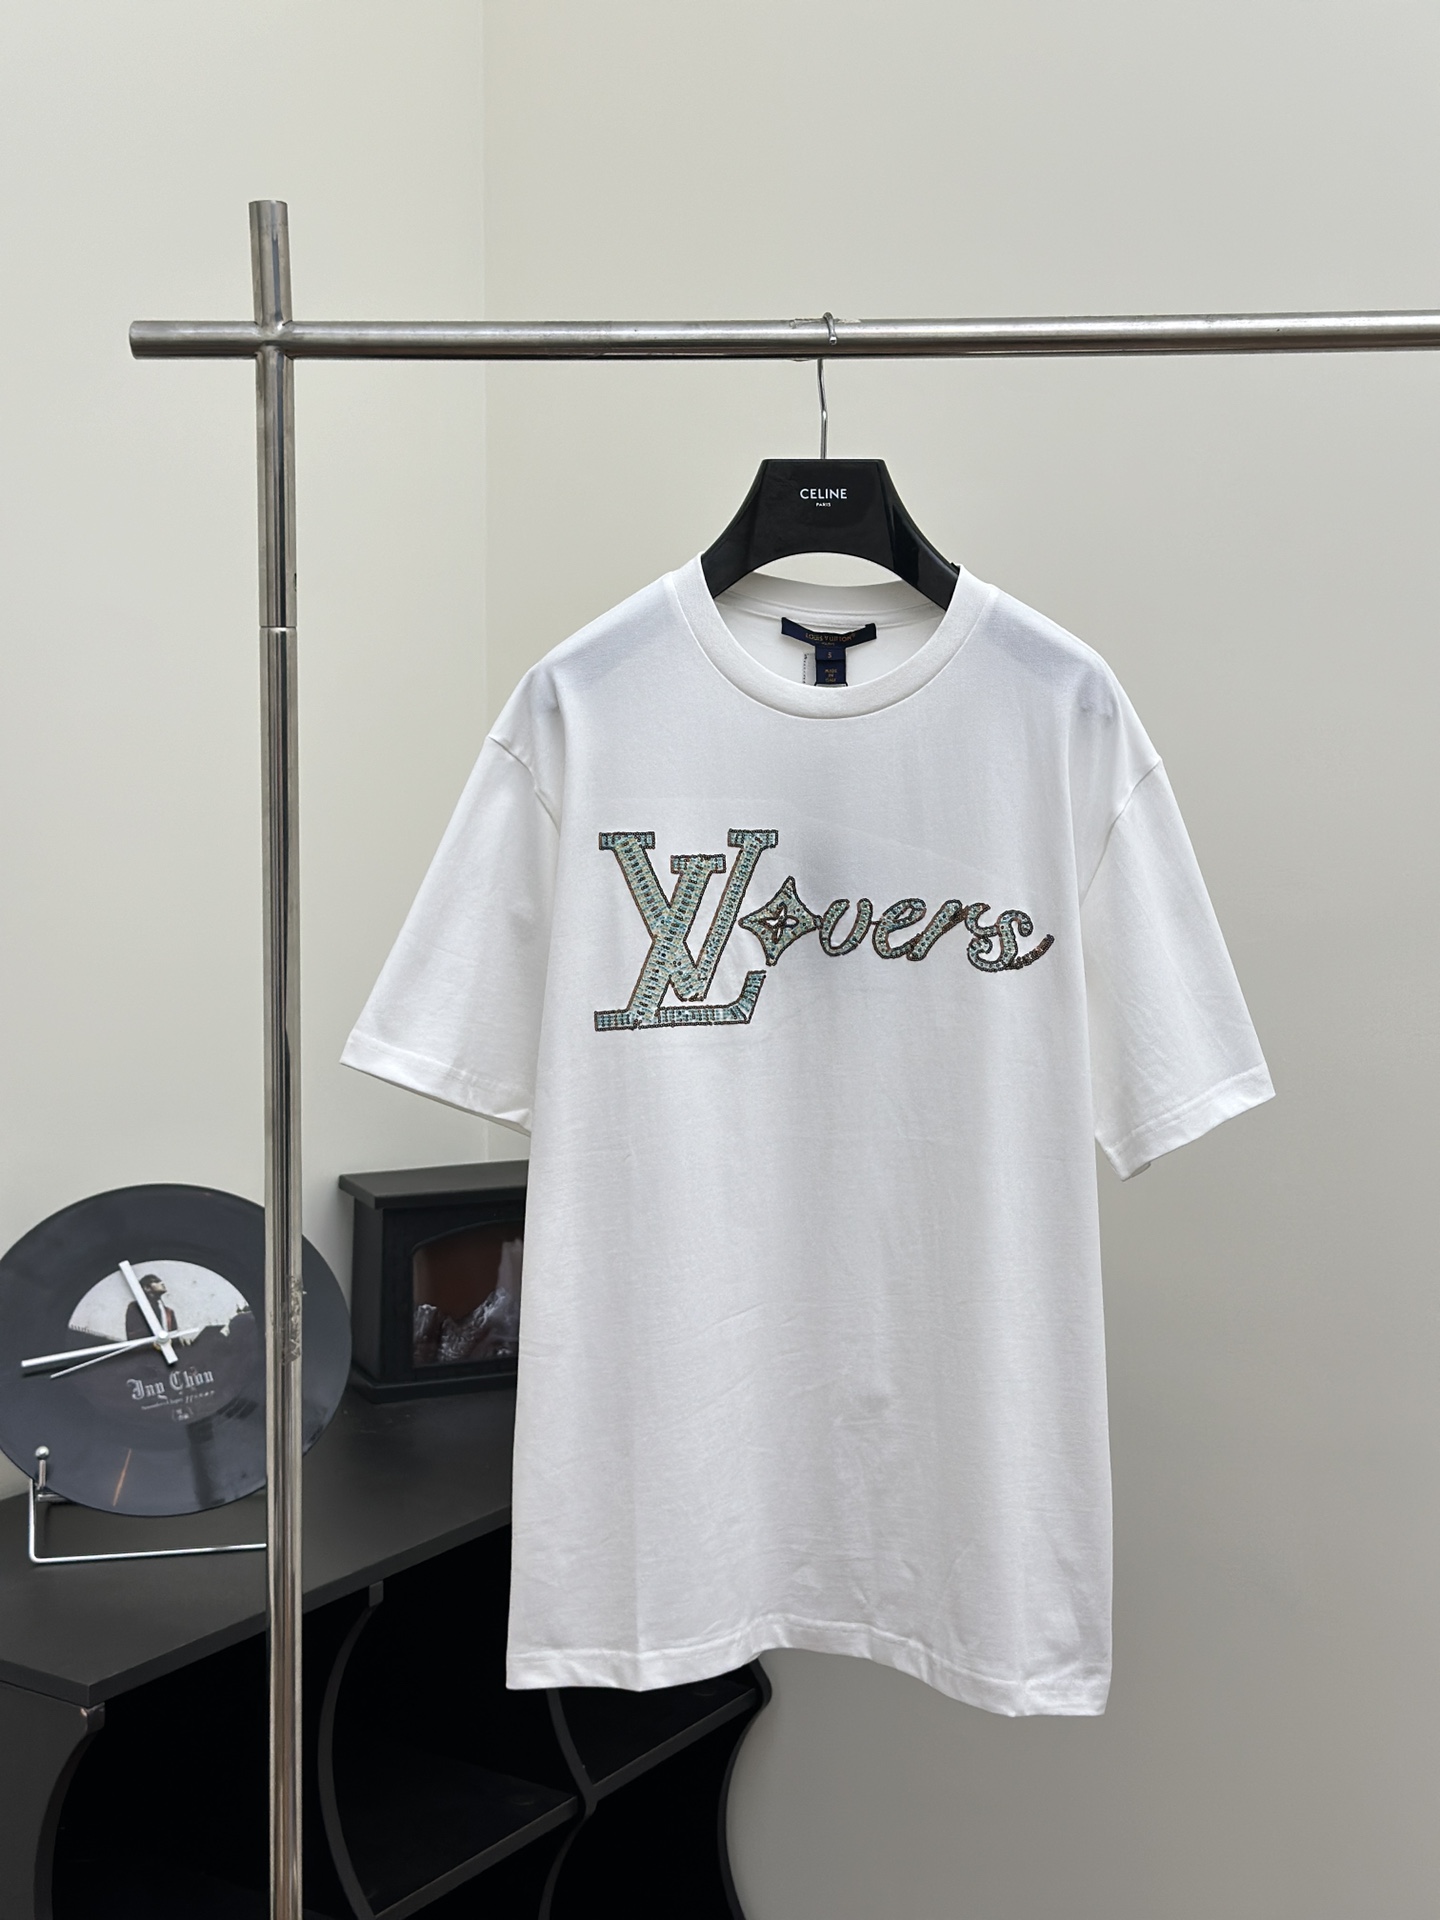 1:1 Clone
 Louis Vuitton Clothing T-Shirt Embroidery Cotton Spring/Summer Collection Short Sleeve